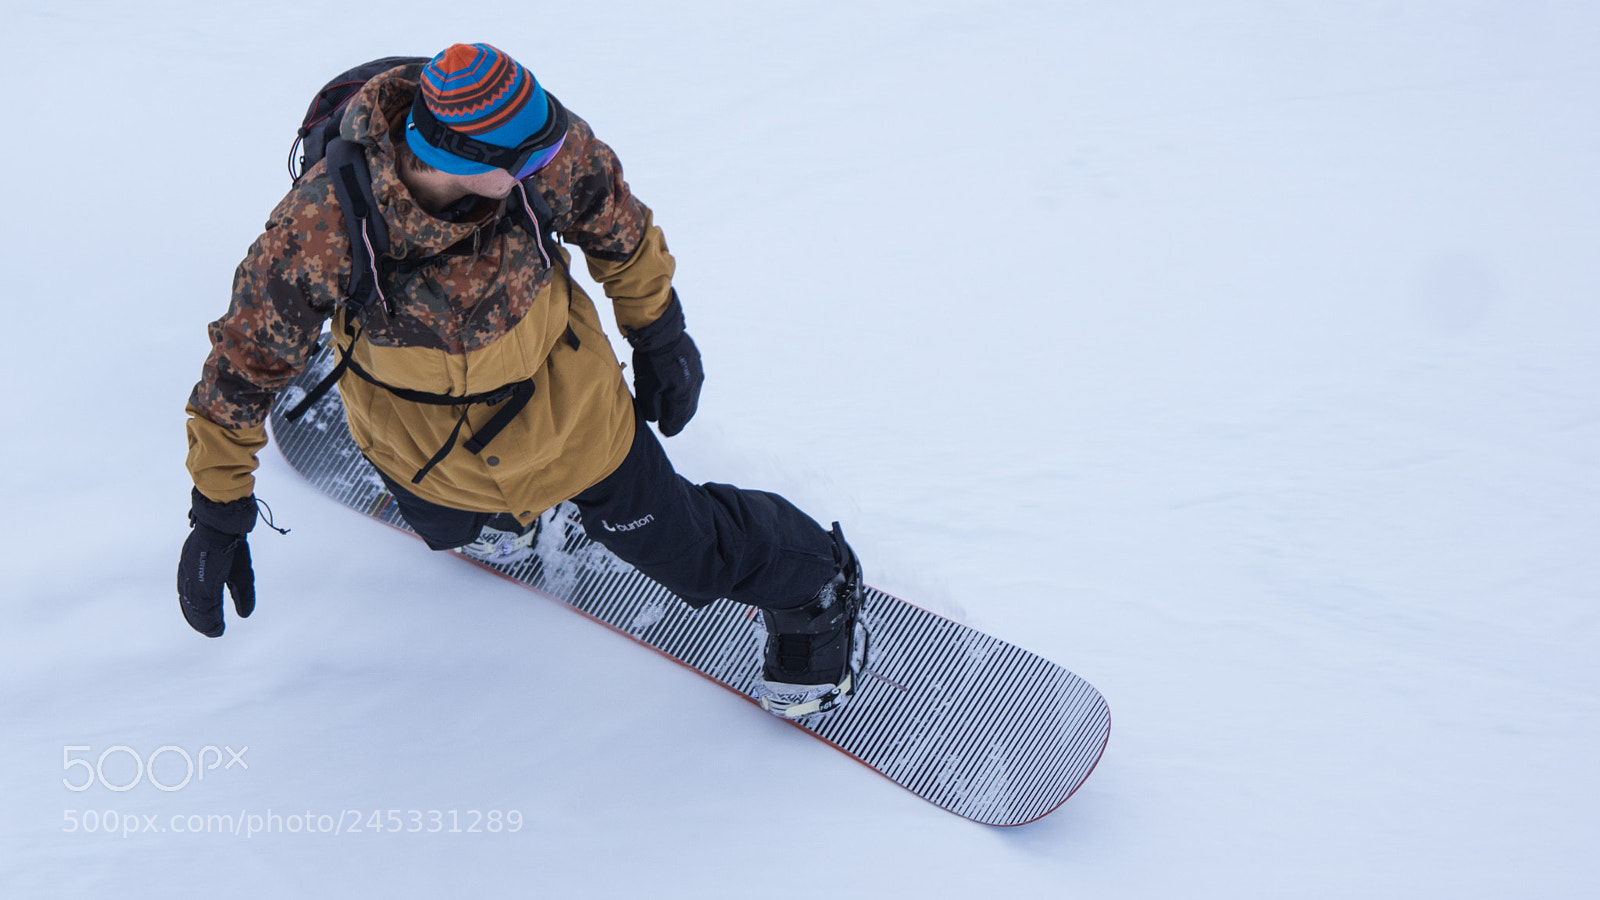 Pentax K-3 sample photo. Snowboarder from above photography